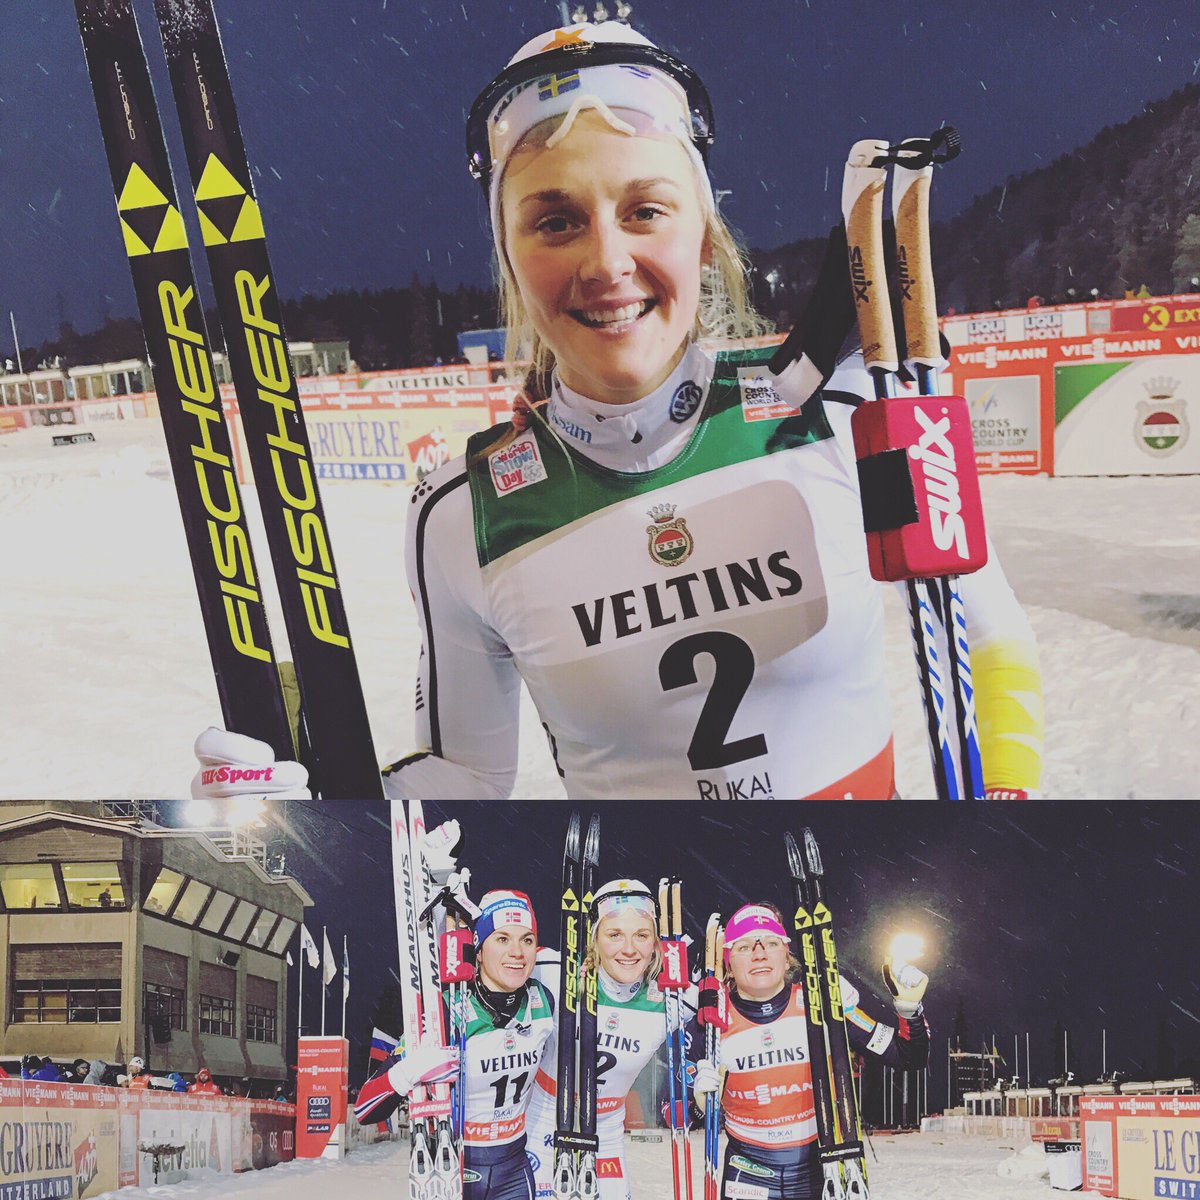 Sweden's Stina Nilsson (top and bottom center) won her first World Cup classic sprint on Saturday in the first race of the 2016/2017 World Cup season. Norway's Maiken Caspersen Falla (bottom right) placed second and Heidi Weng (bottom left) was third. (Photo: FIS Cross Country Twitter)